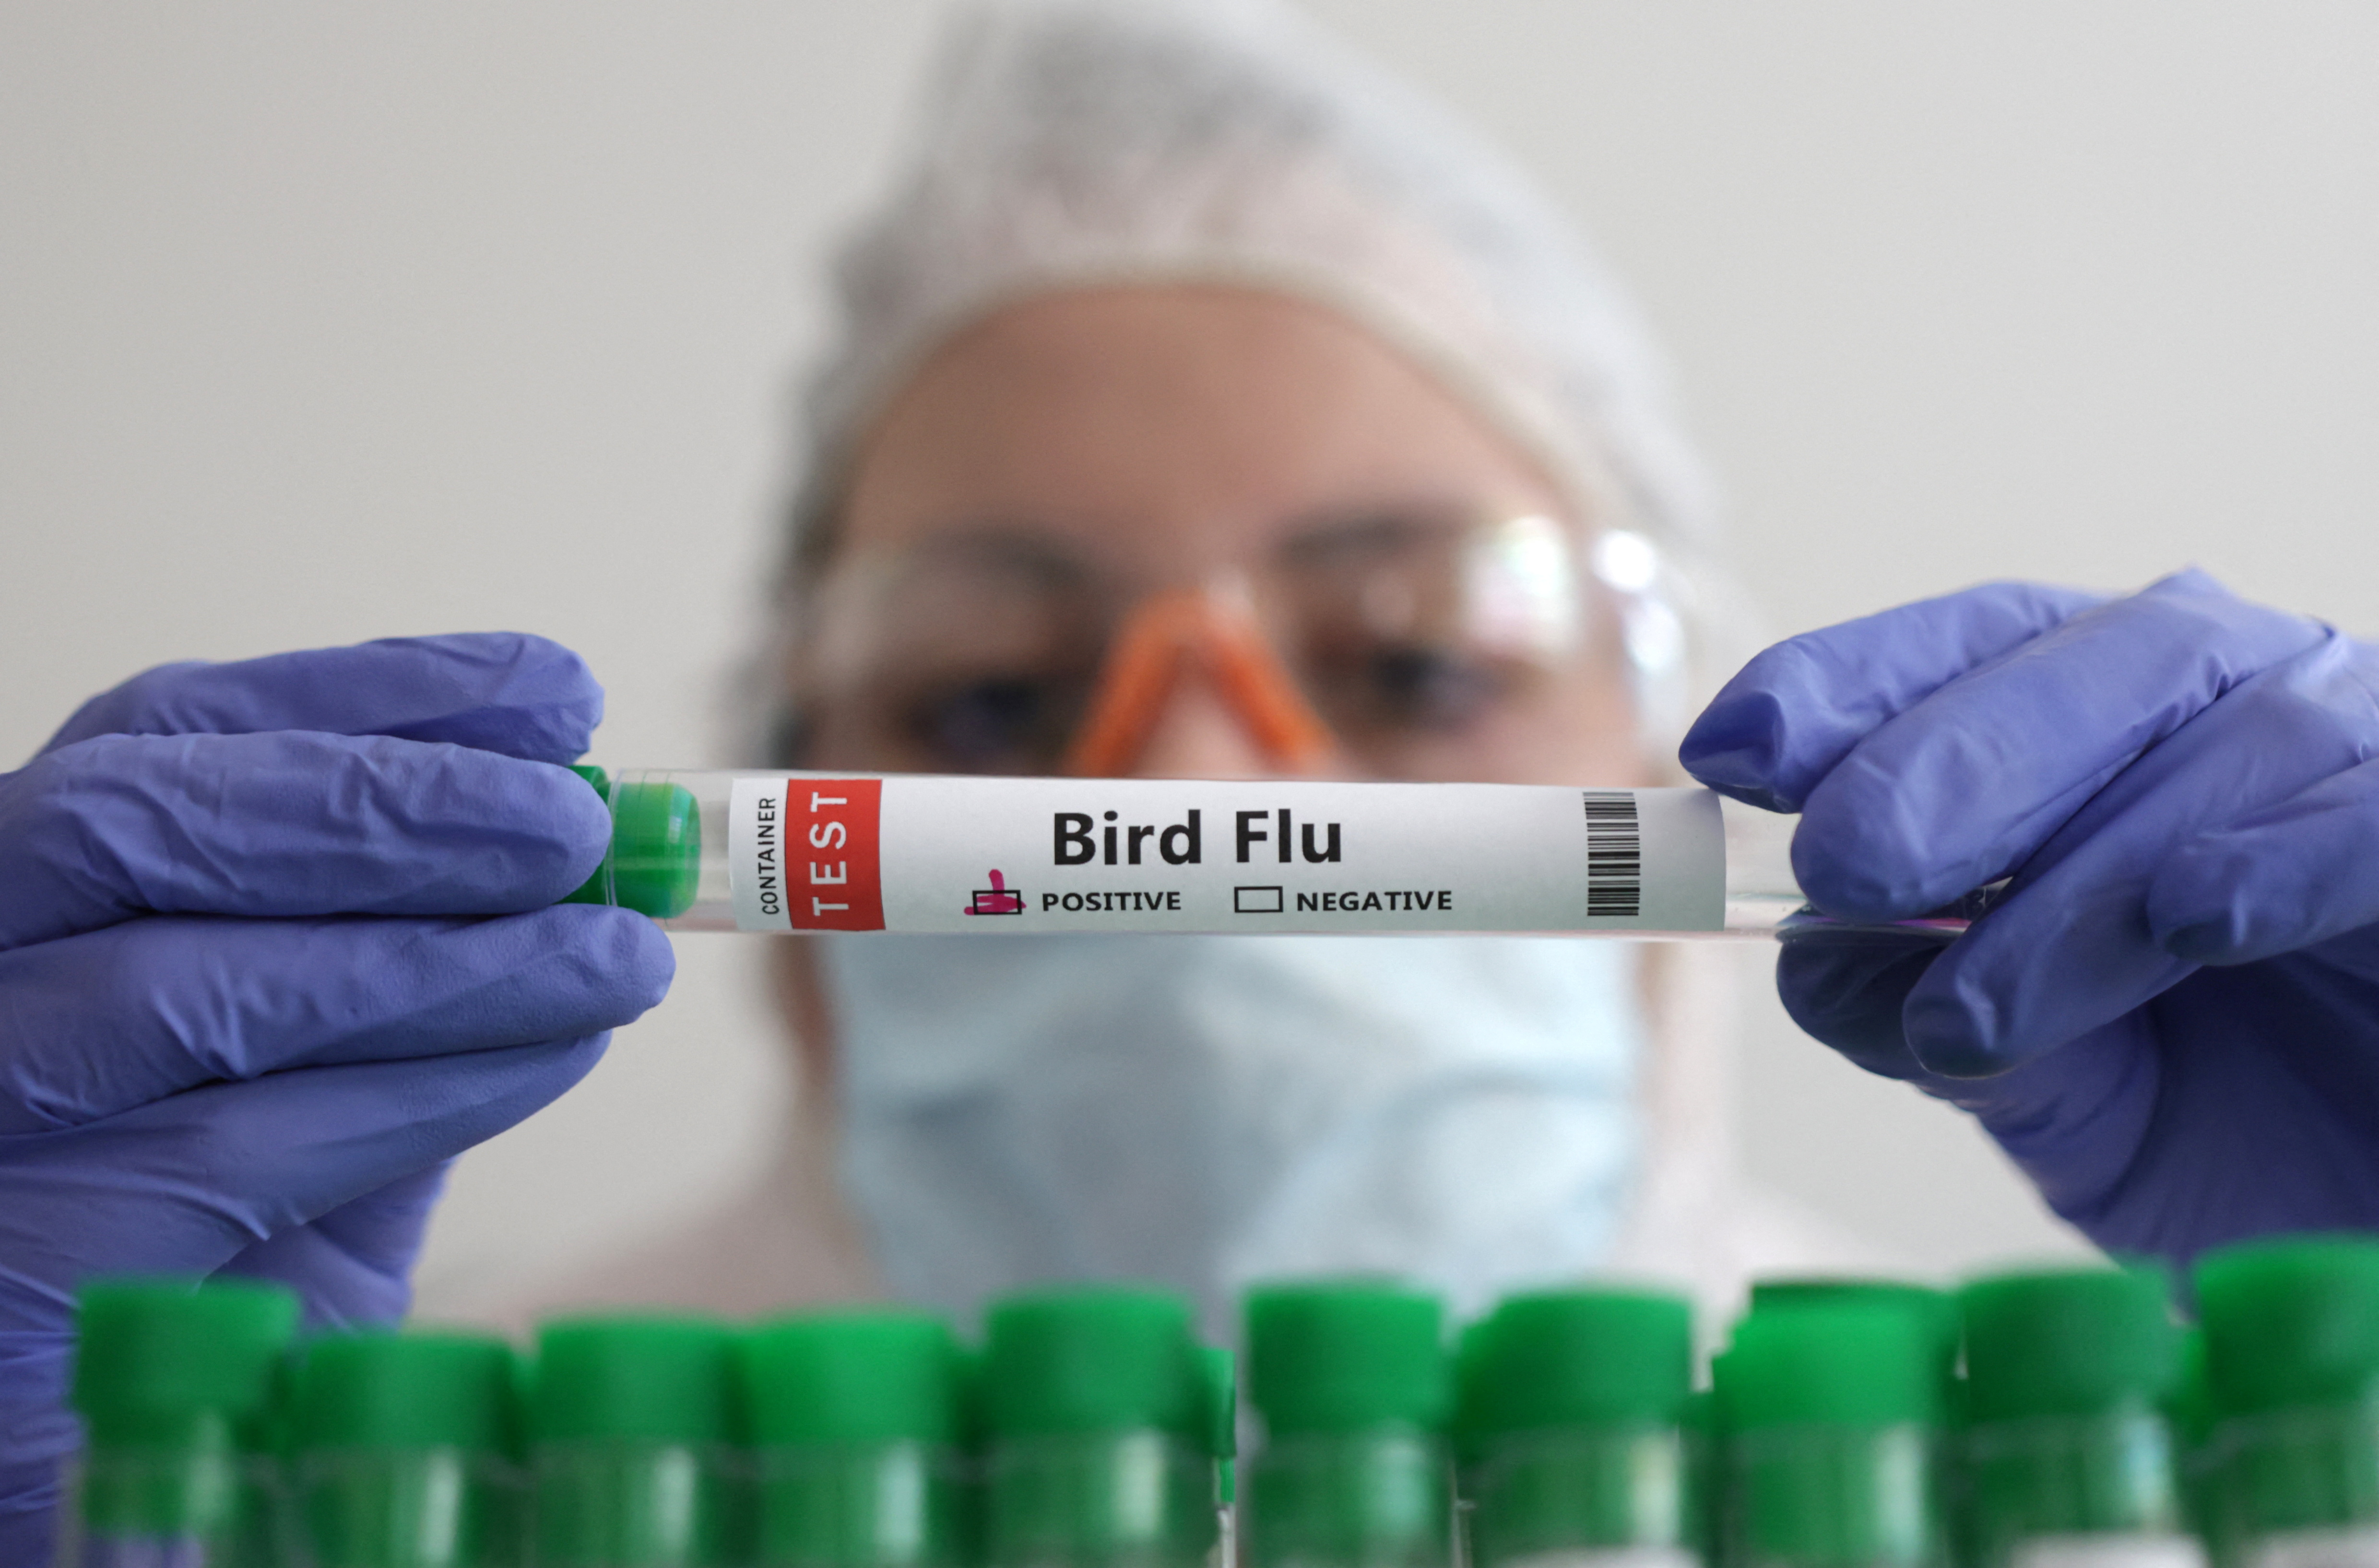 Explainer: What are the bird flu risks to people and animals? | Reuters